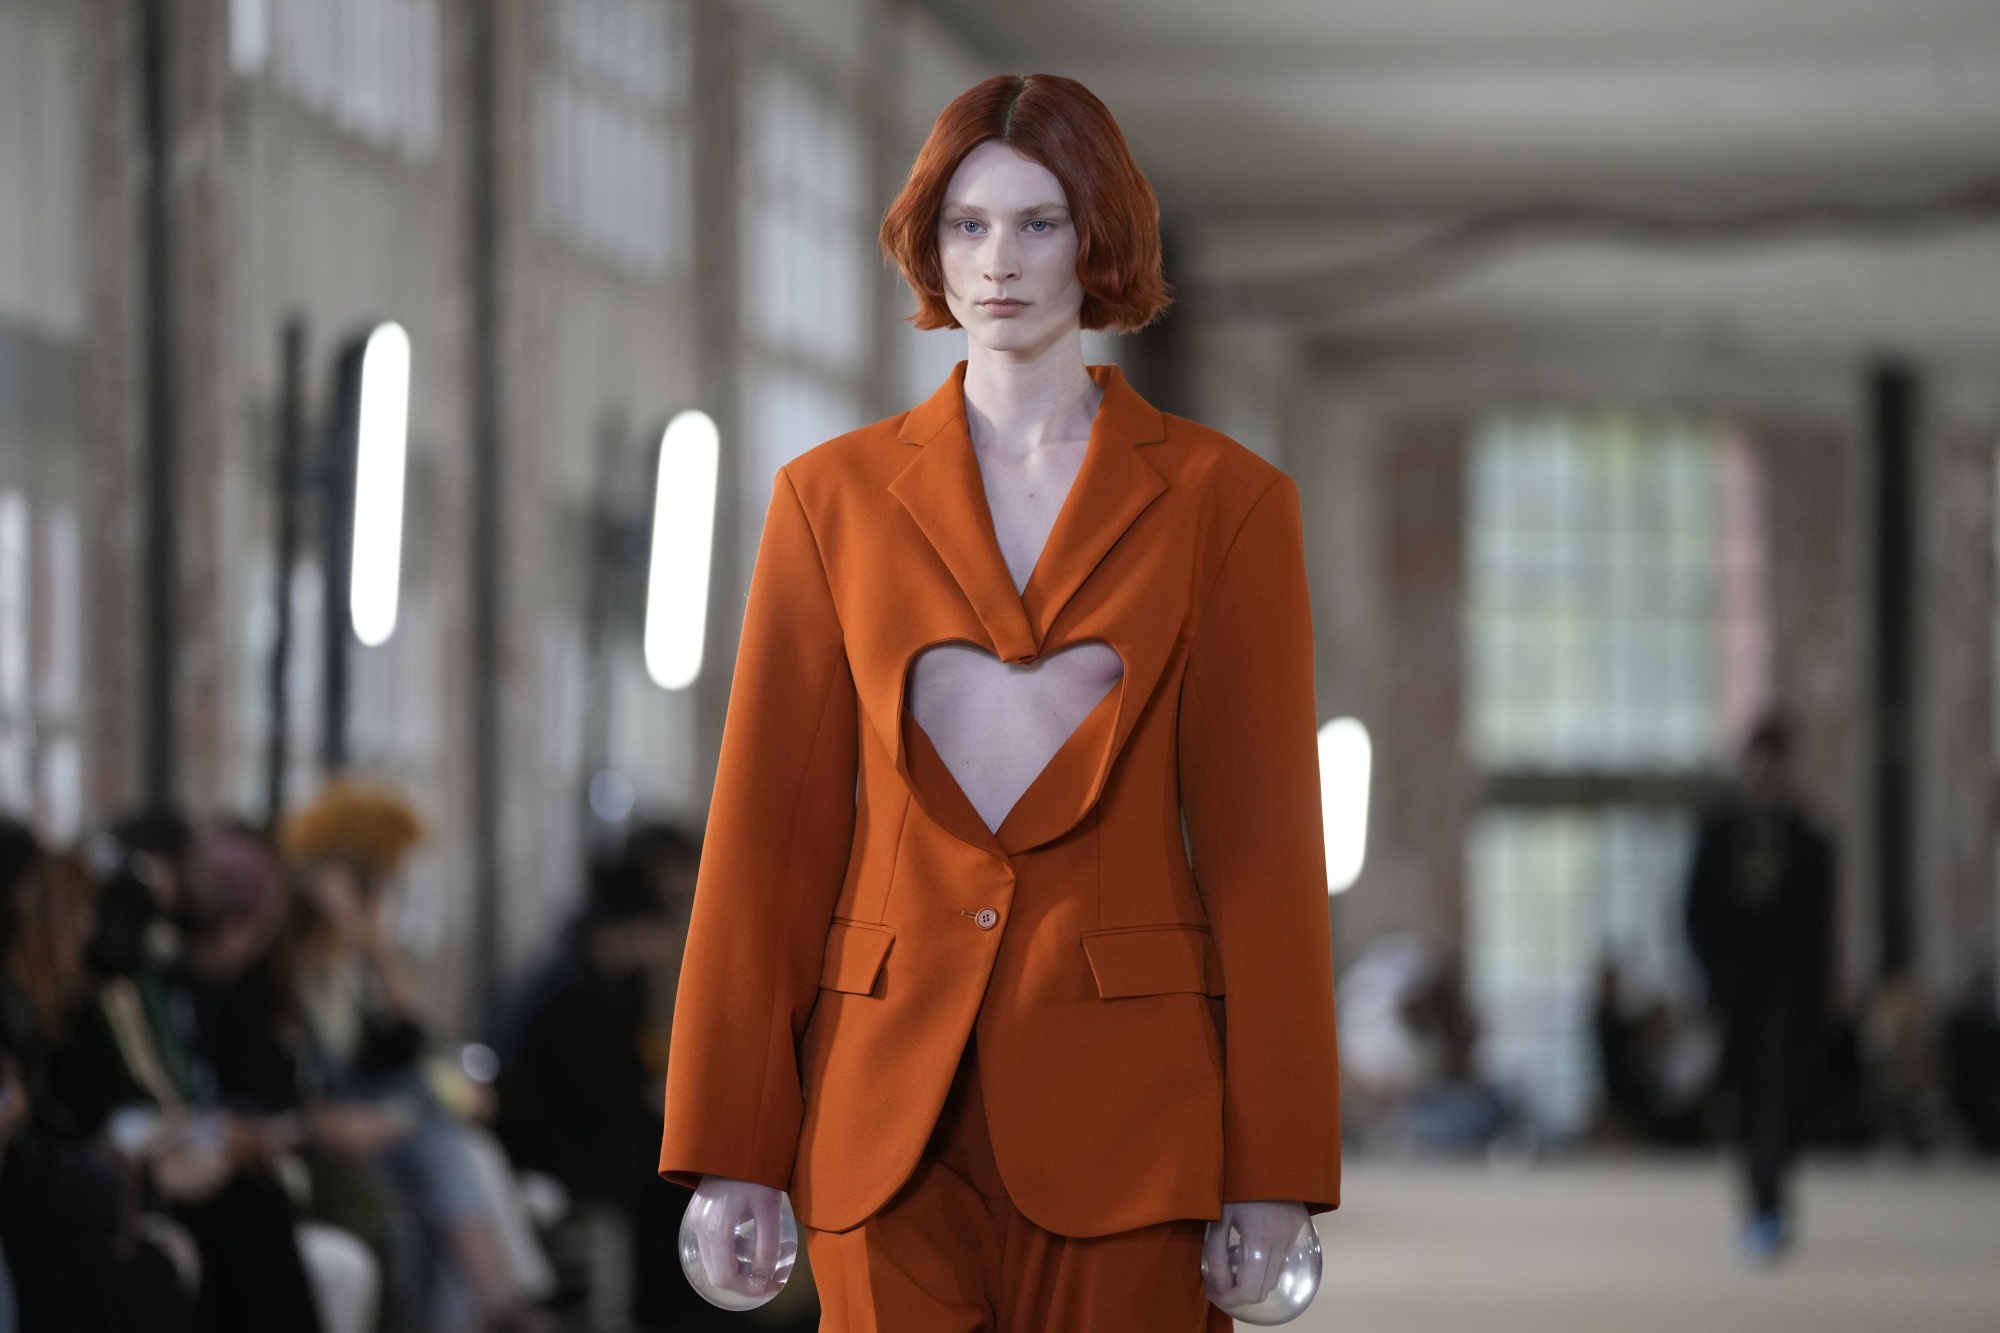 Paris Fashion Week 2023: What It's Like to Attend As Regular Person